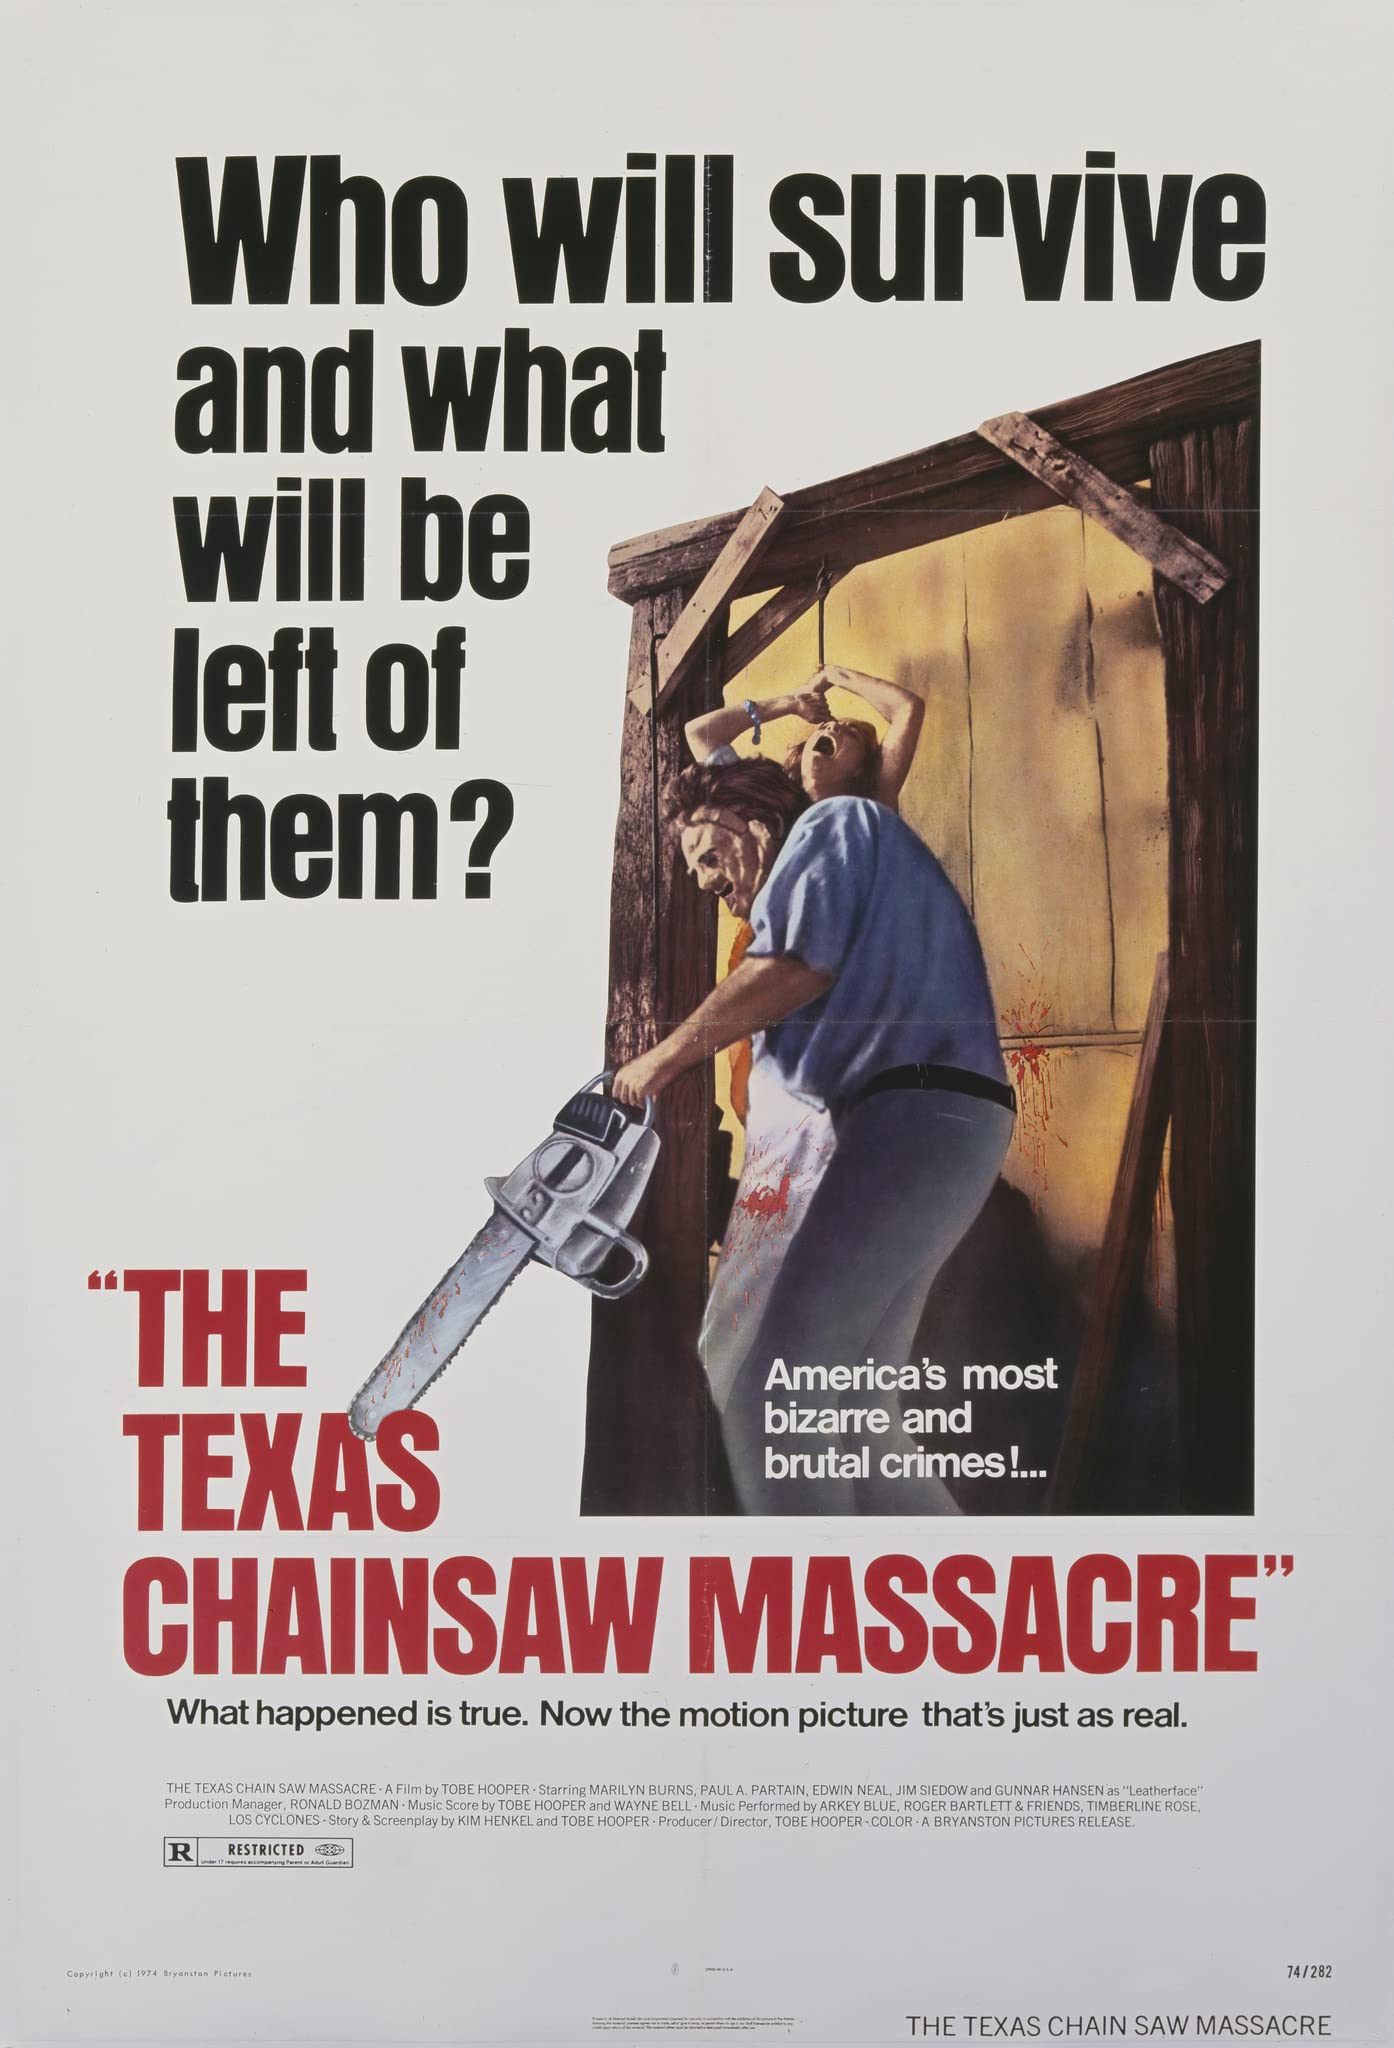 A film poster featuring a man in a mask holding a chainsaw, about to attack a tied up woman.